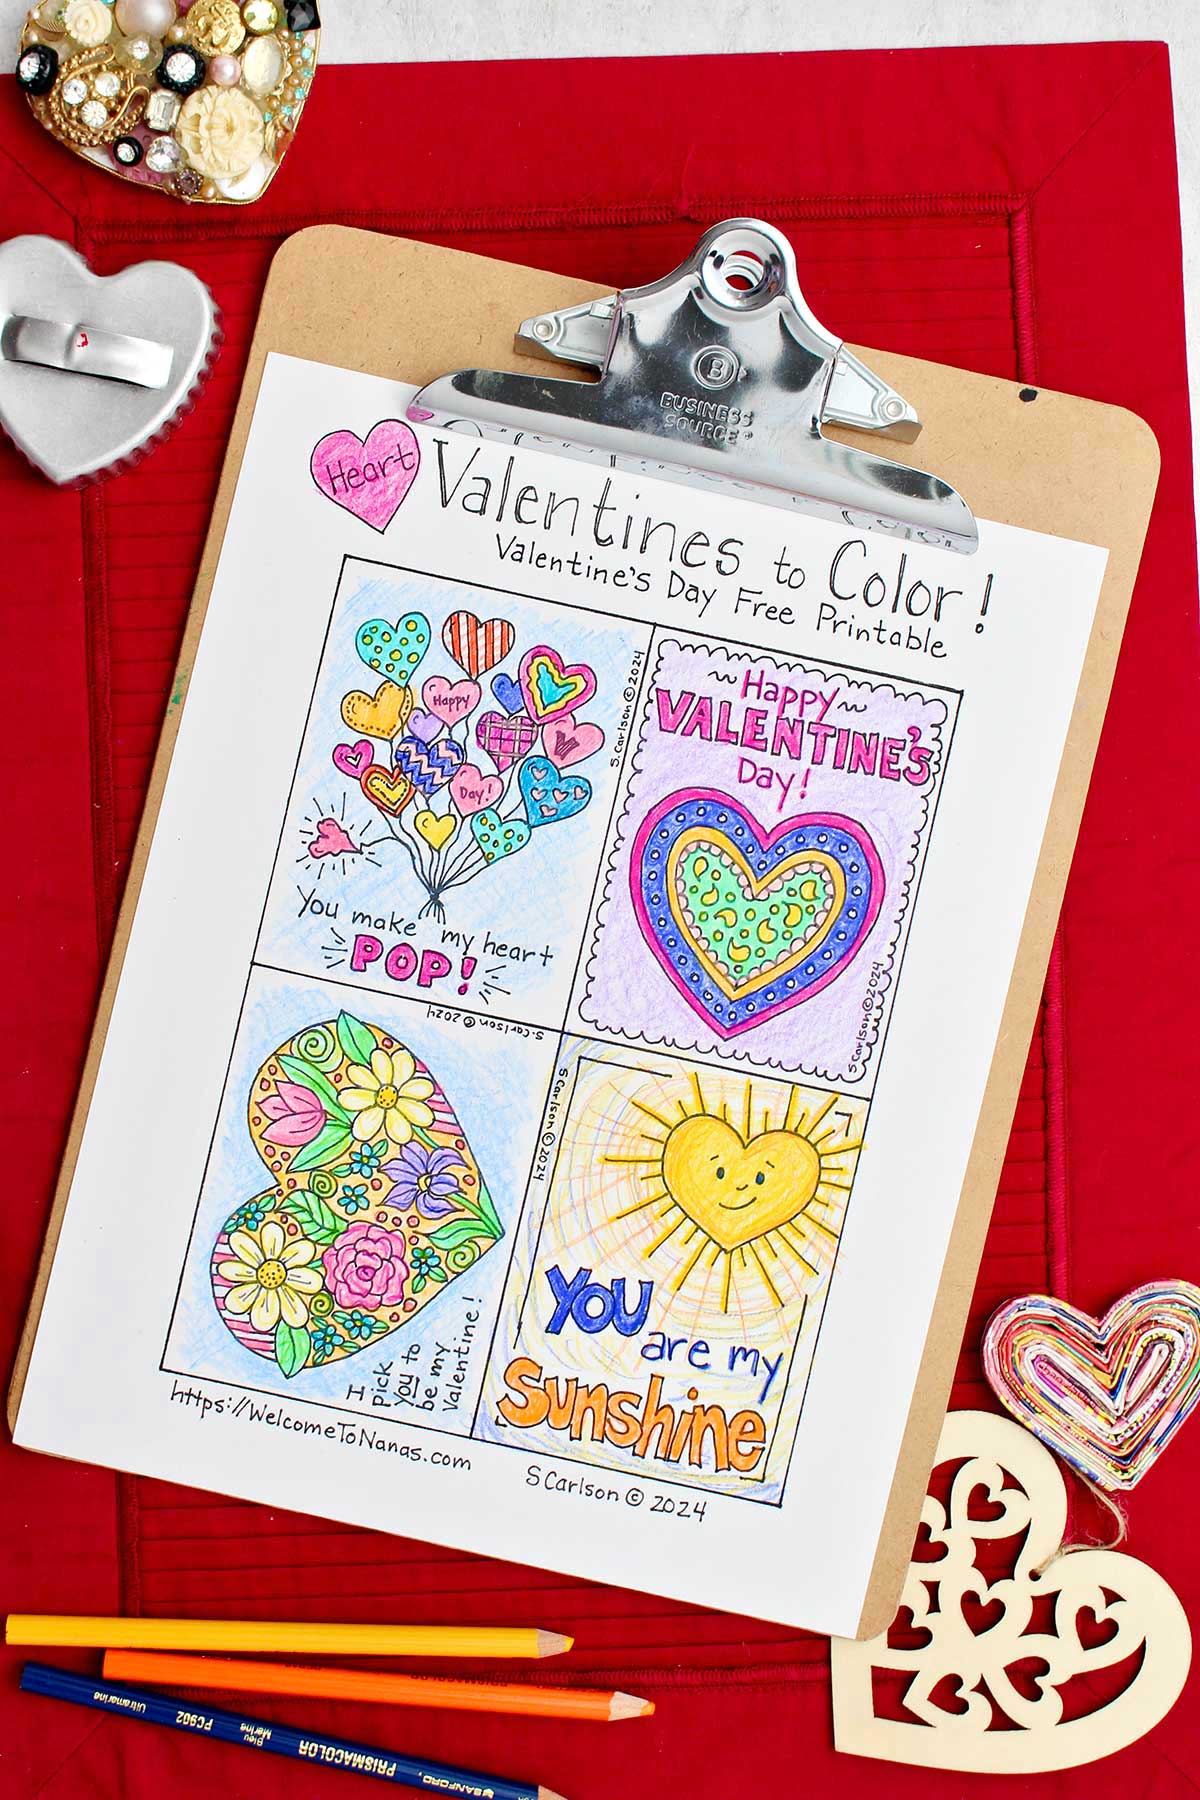 Valentine's Day printable fully colored on clipboard resting on a red placemat with heart shaped objects near by.